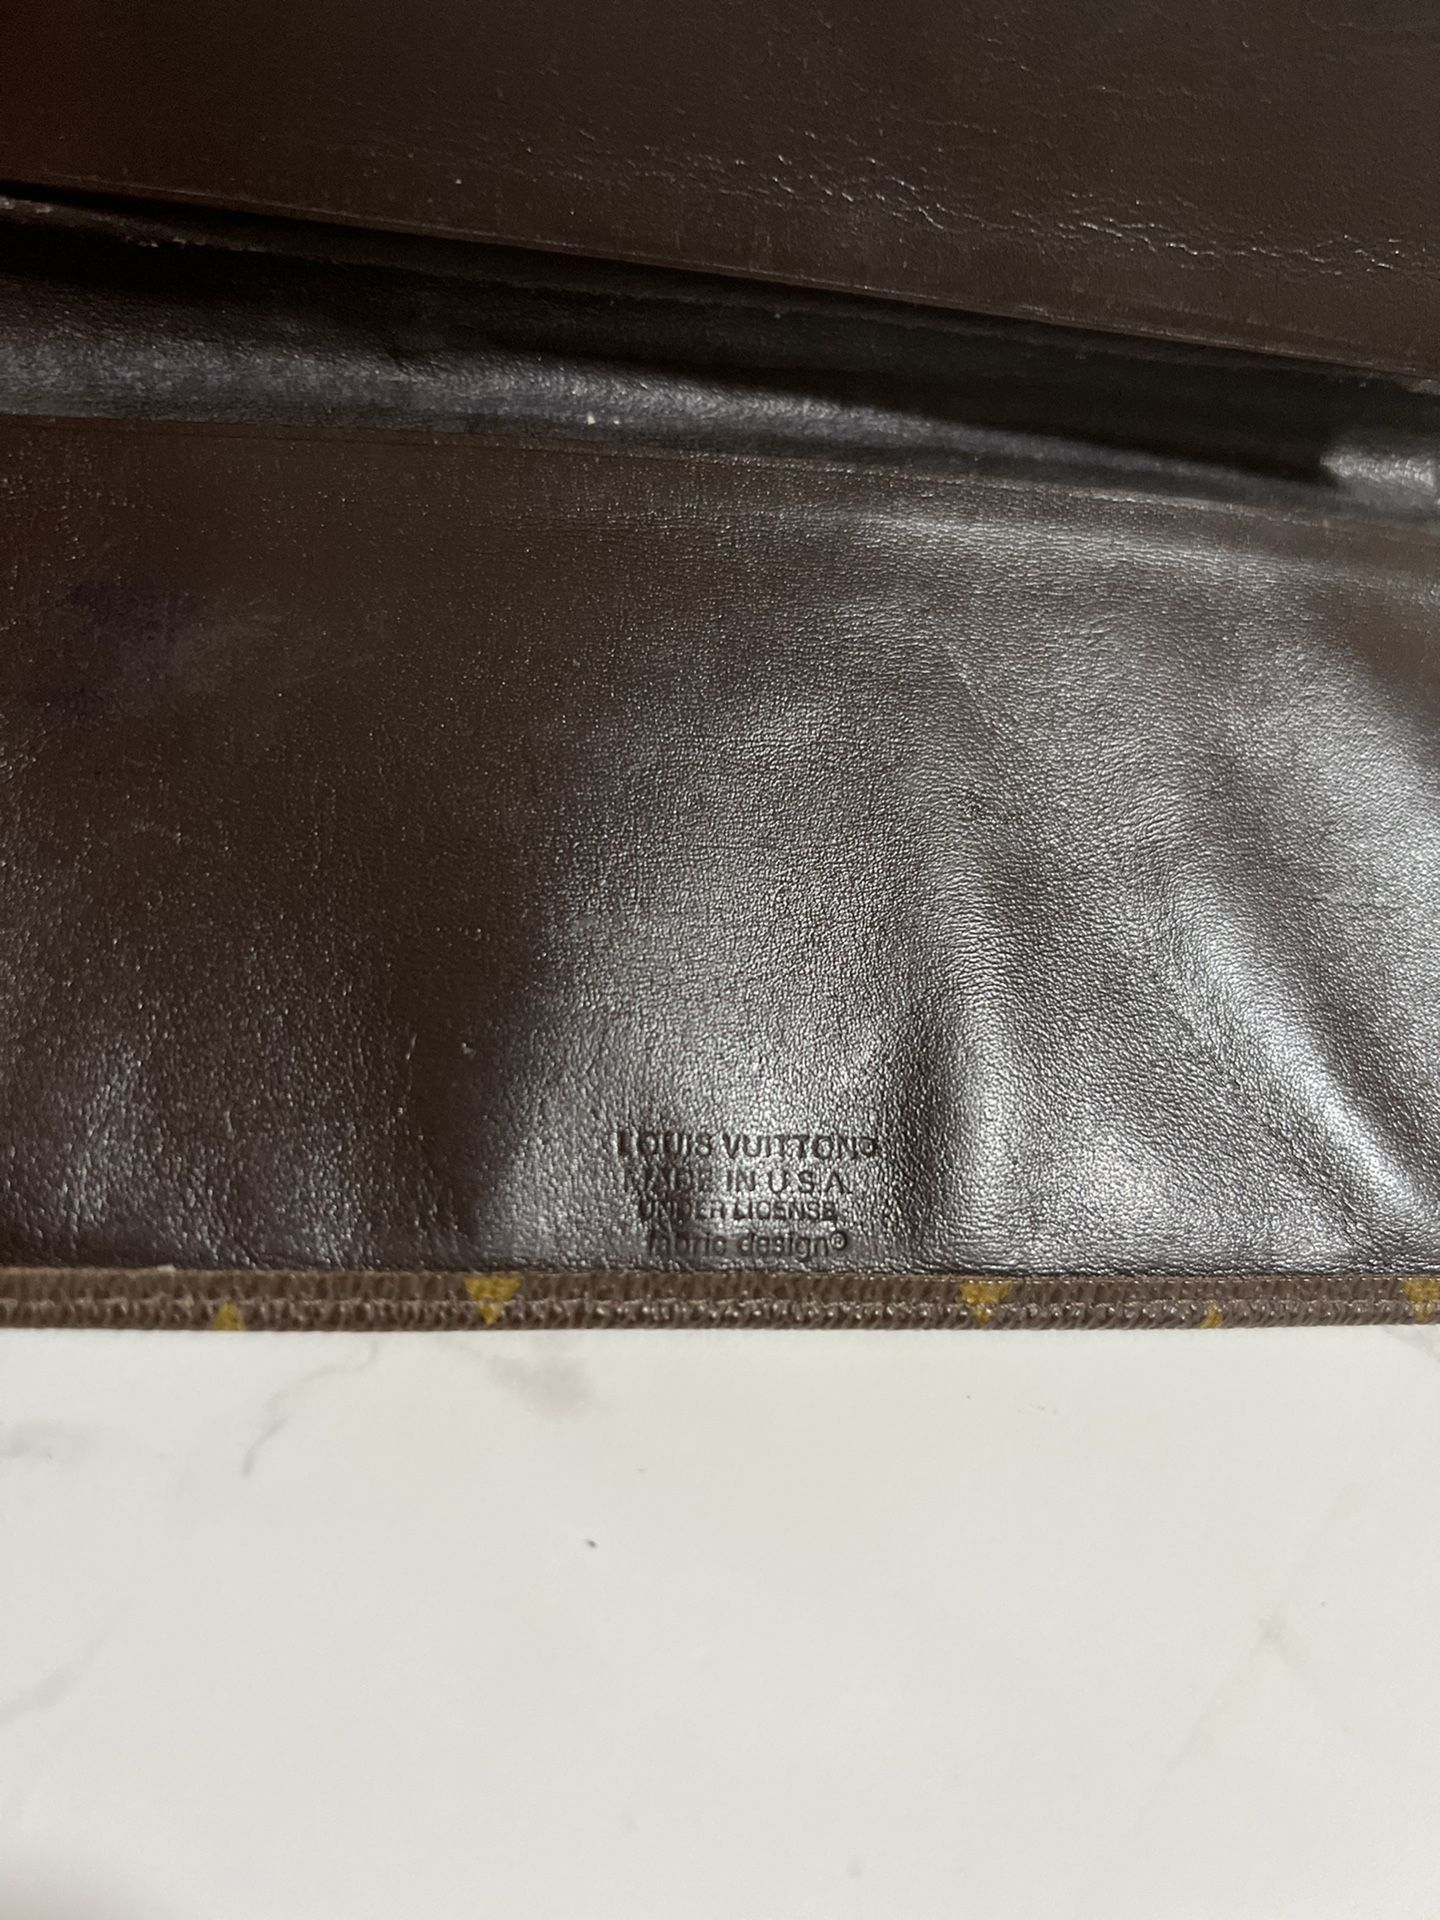 Louis Vuitton Vintage checkbook Cover for Sale in Watsonville, CA